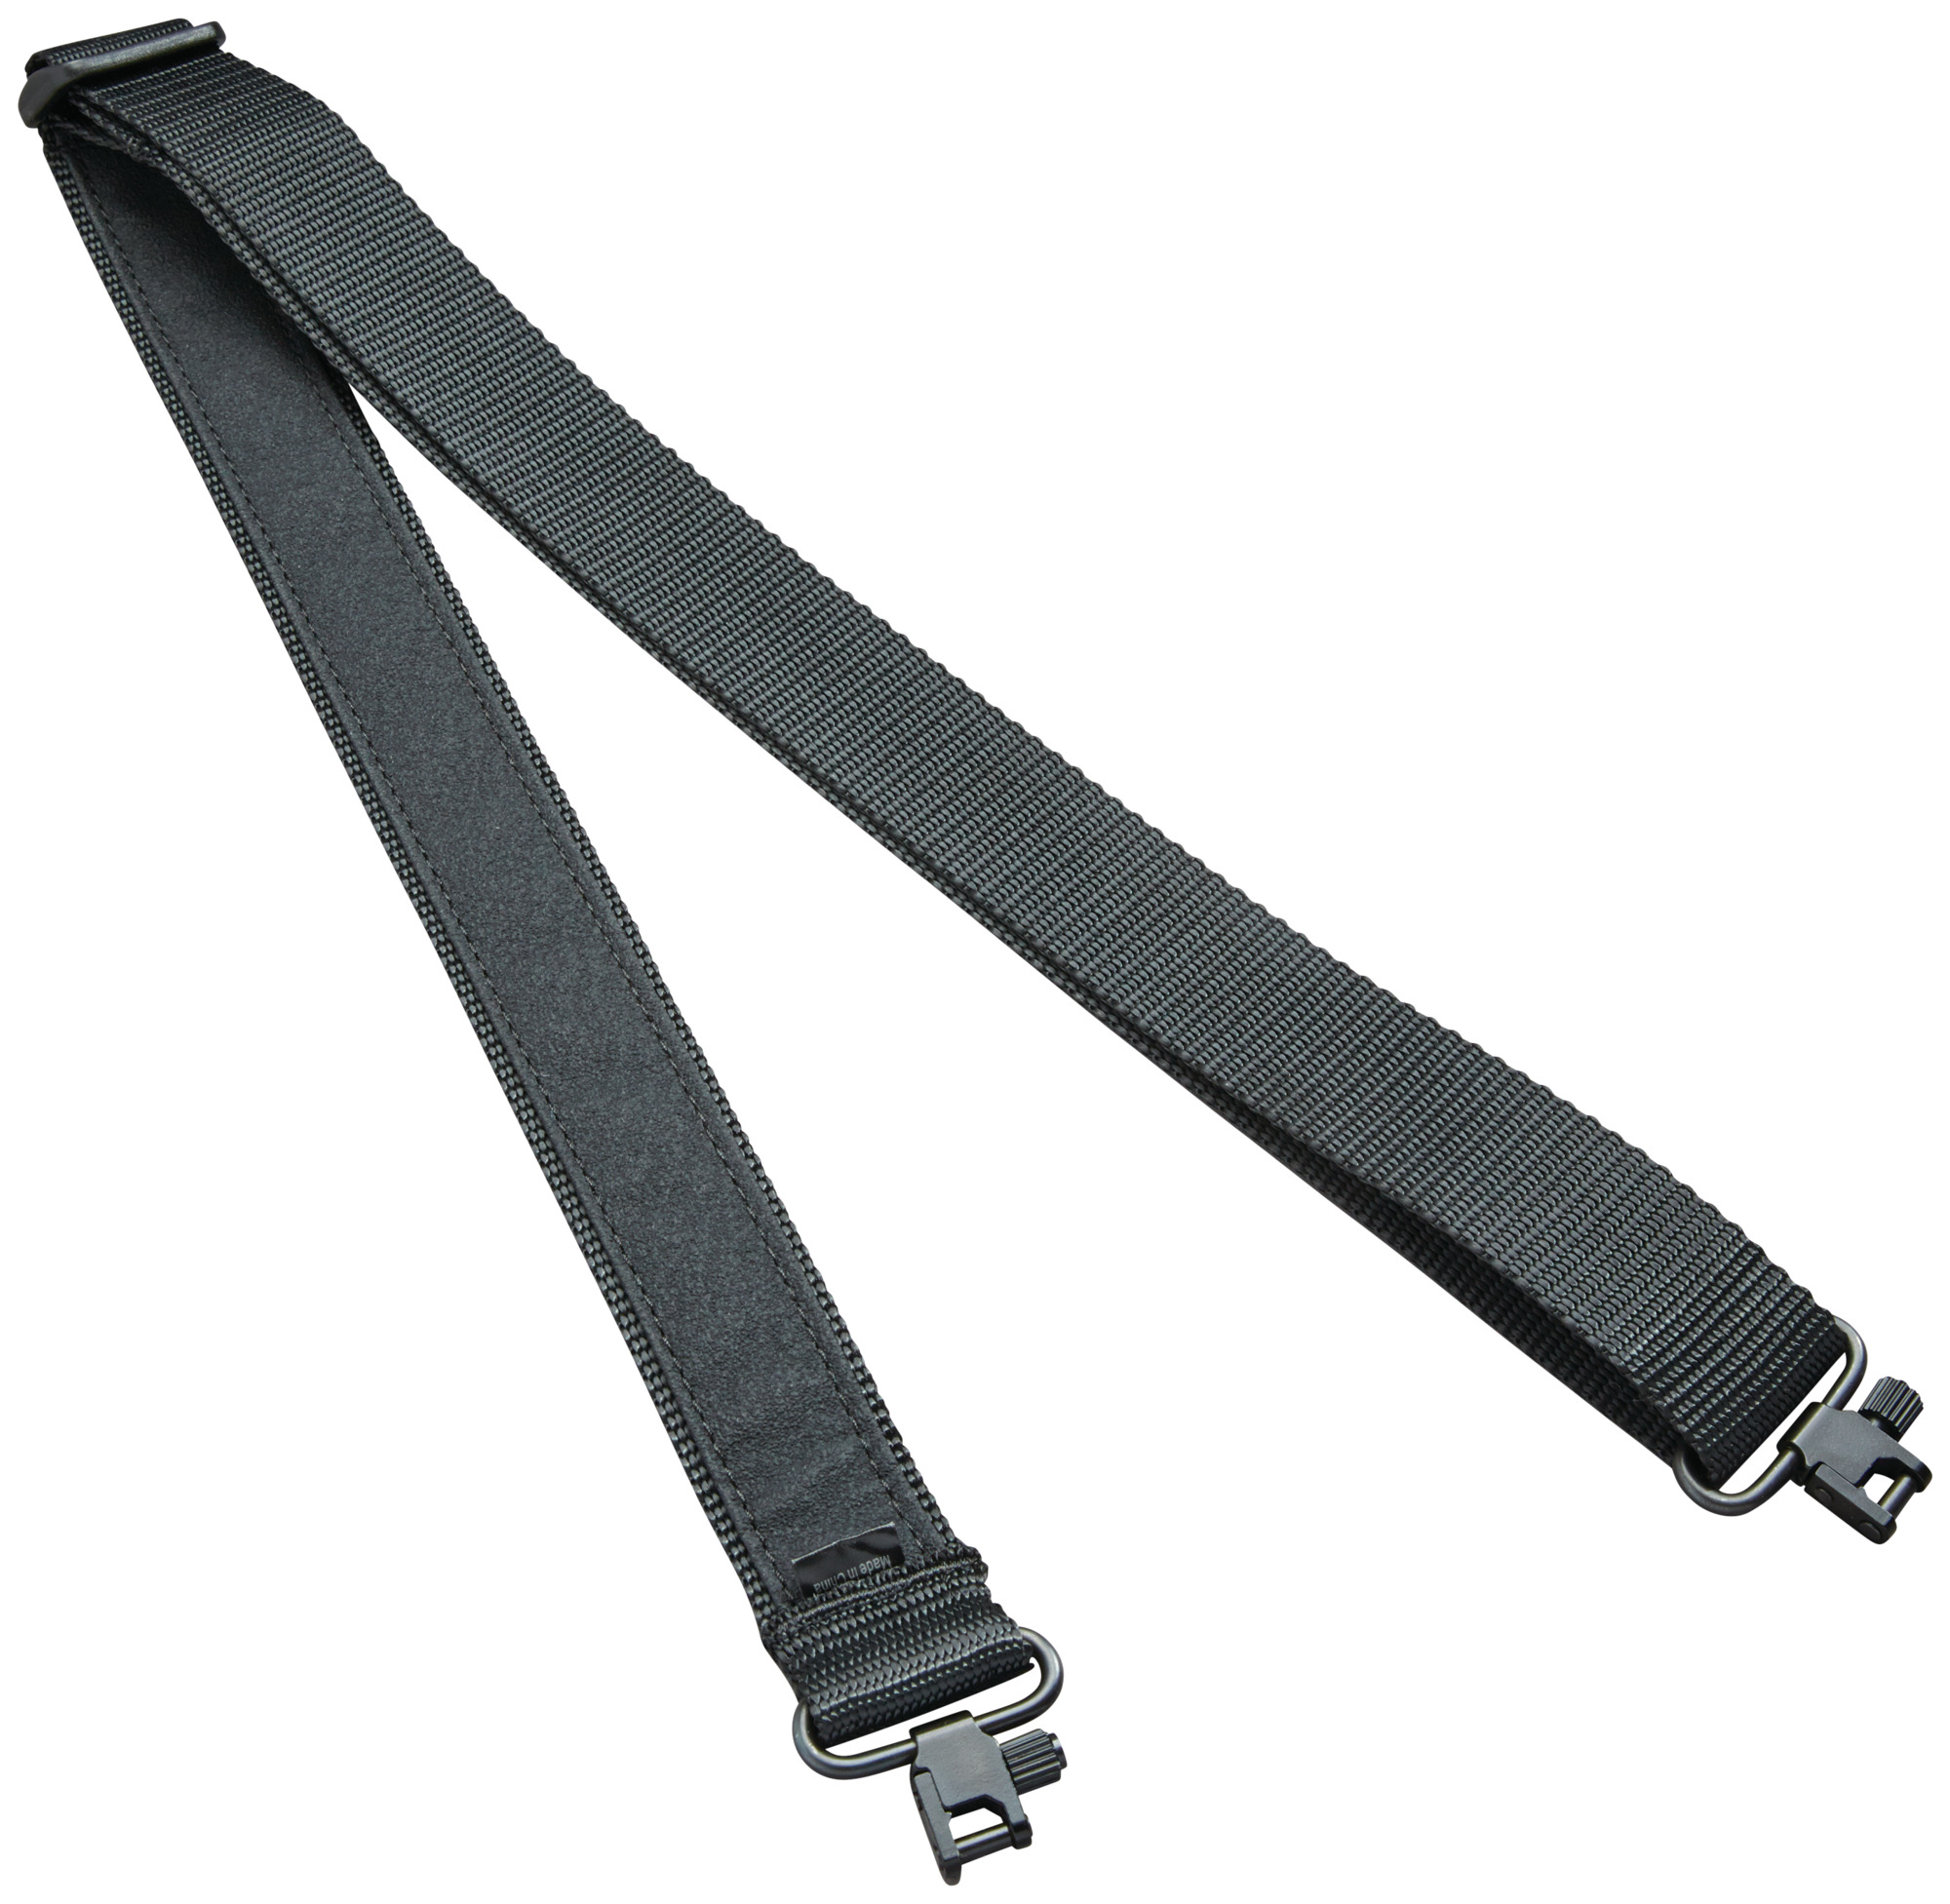 Mountain Rifle Sling with Swivels | Butler Creek